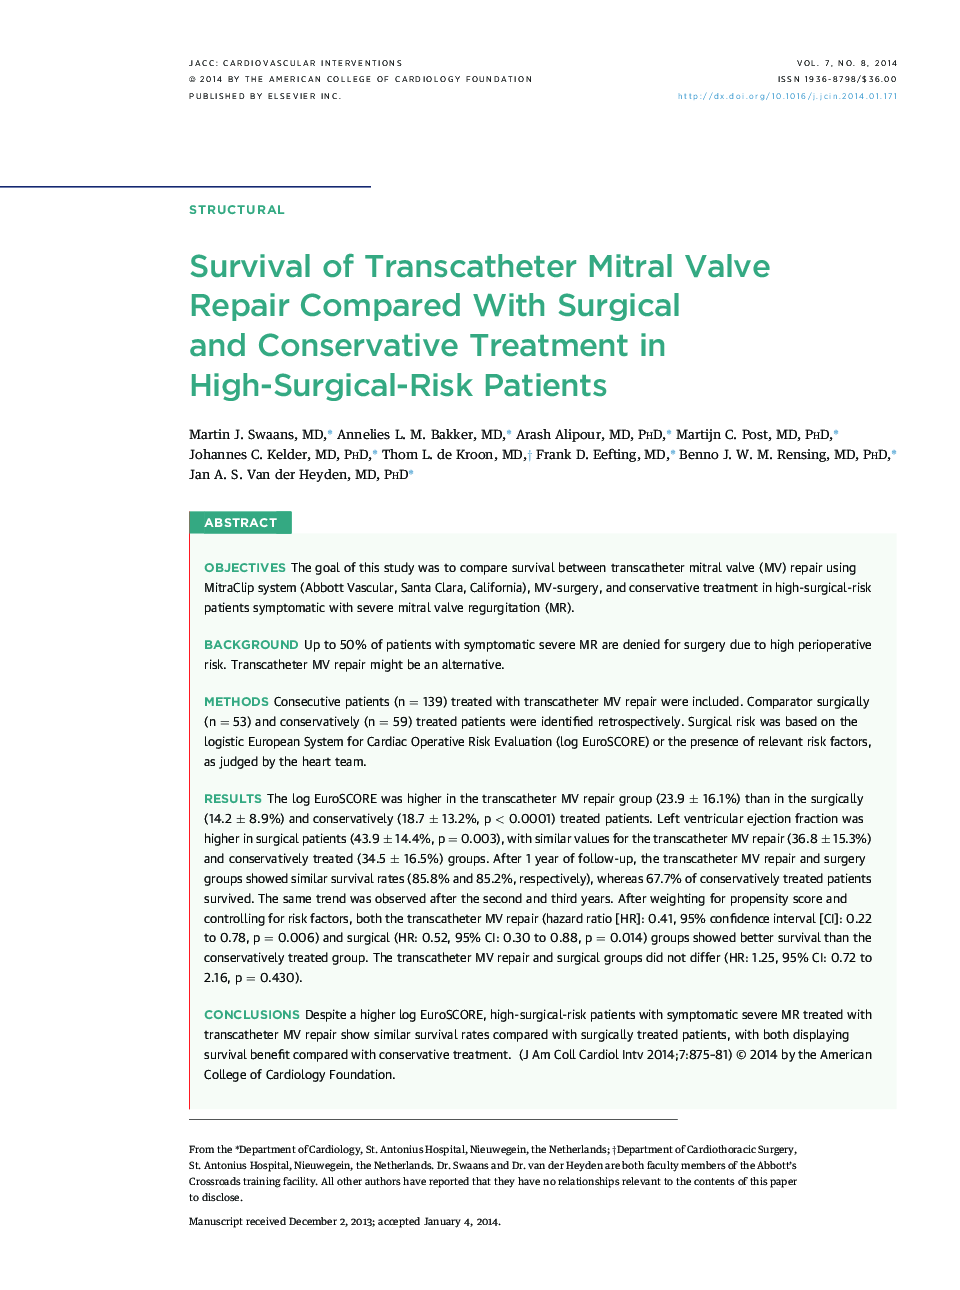 Survival of Transcatheter Mitral Valve Repair Compared With Surgical andÂ Conservative Treatment in High-Surgical-Risk Patients